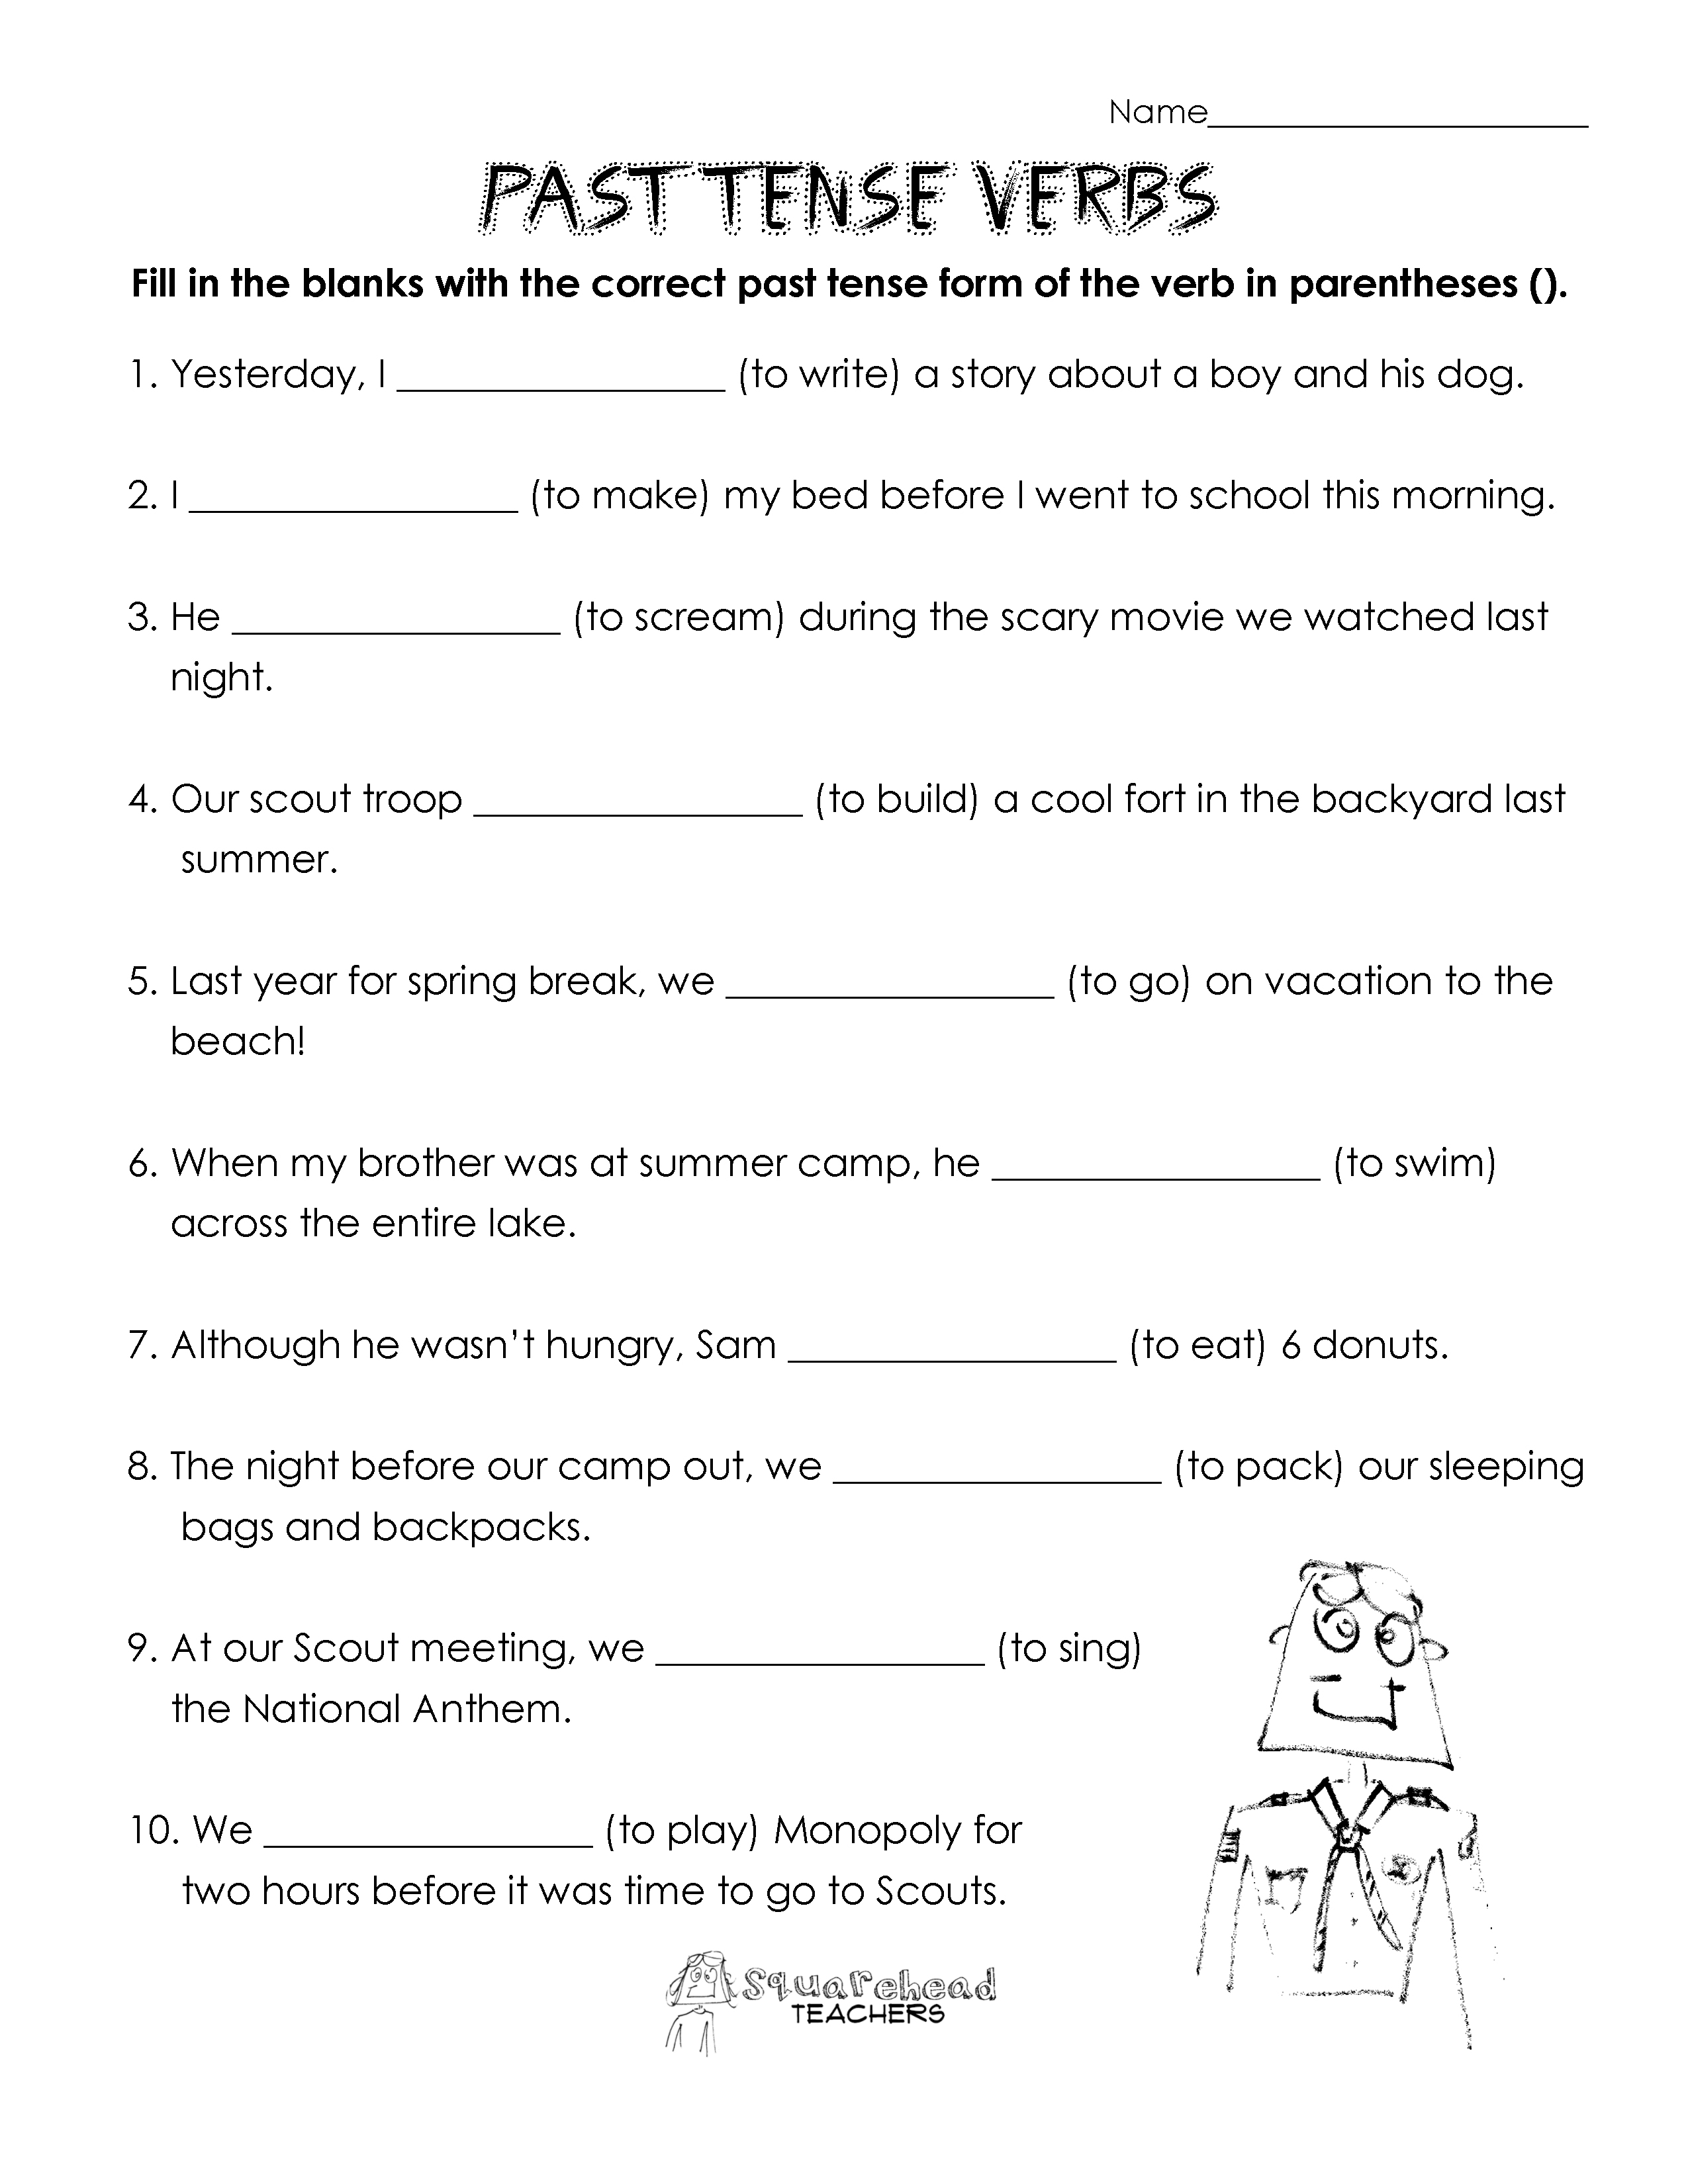 verbs-past-present-and-future-tense-worksheets-99worksheets